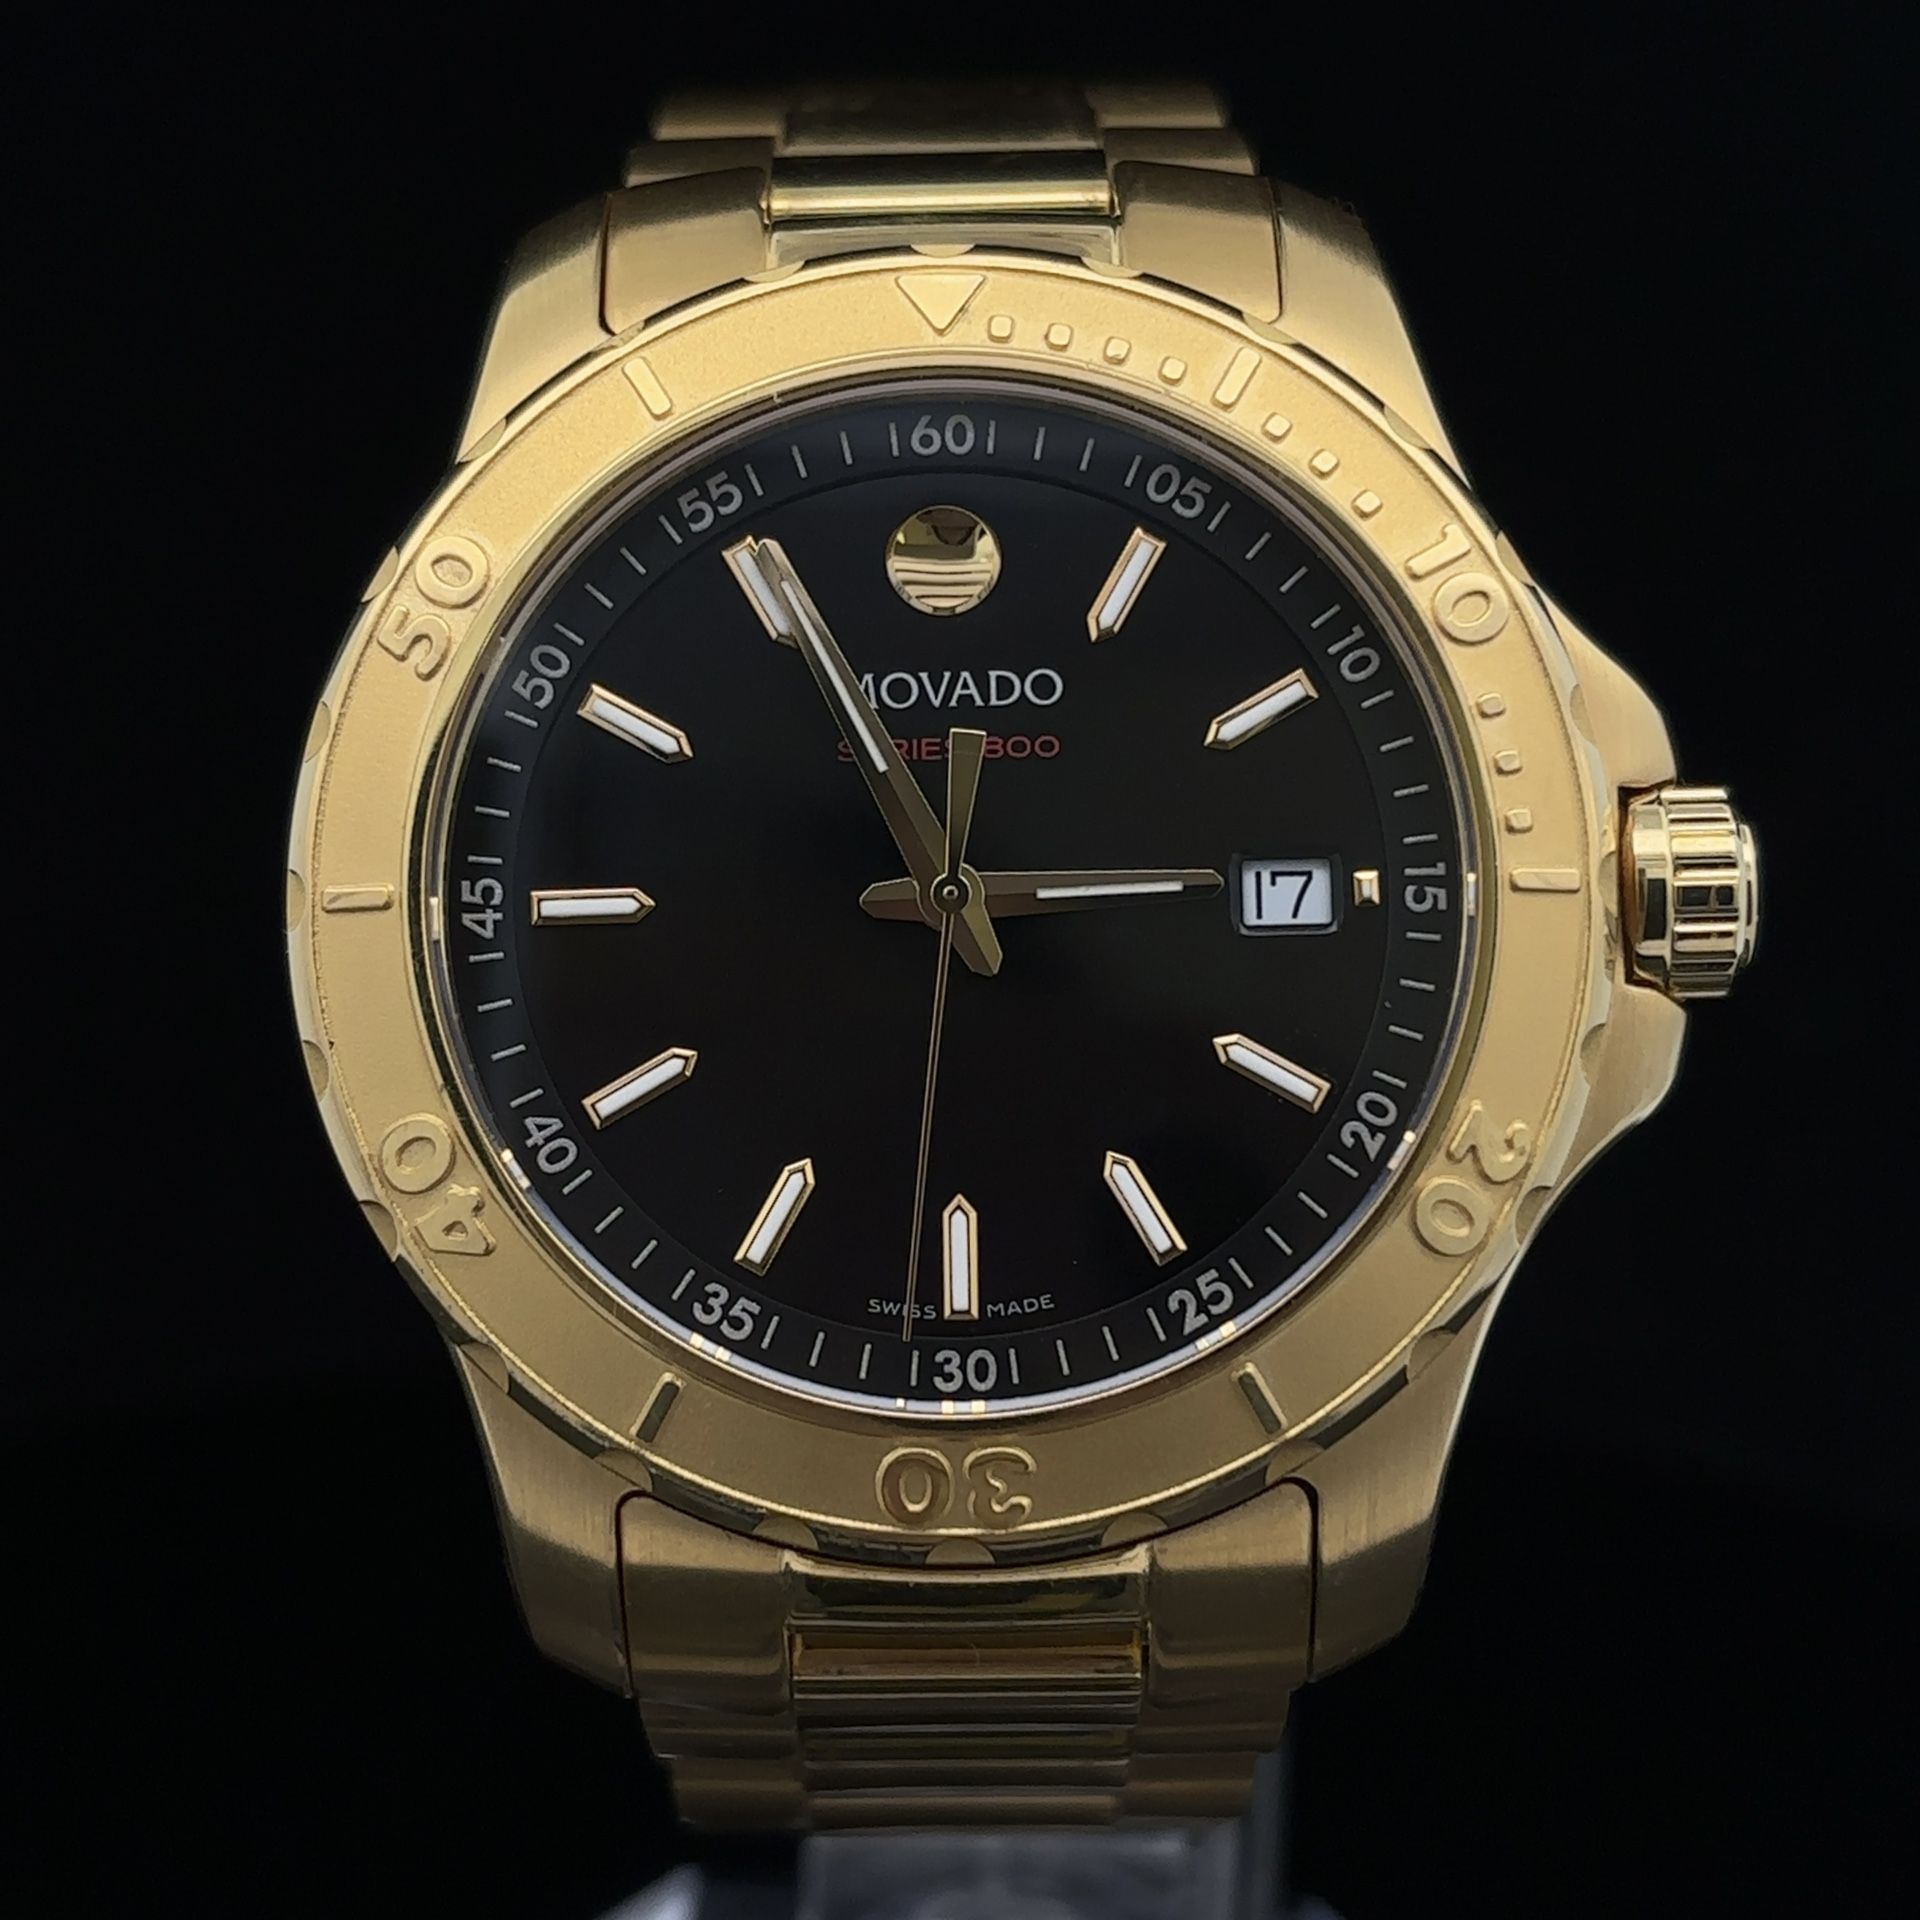 Pre-owned Movado Series 800 Watch With 40mm Black Face & Gold Plated Bracelet 